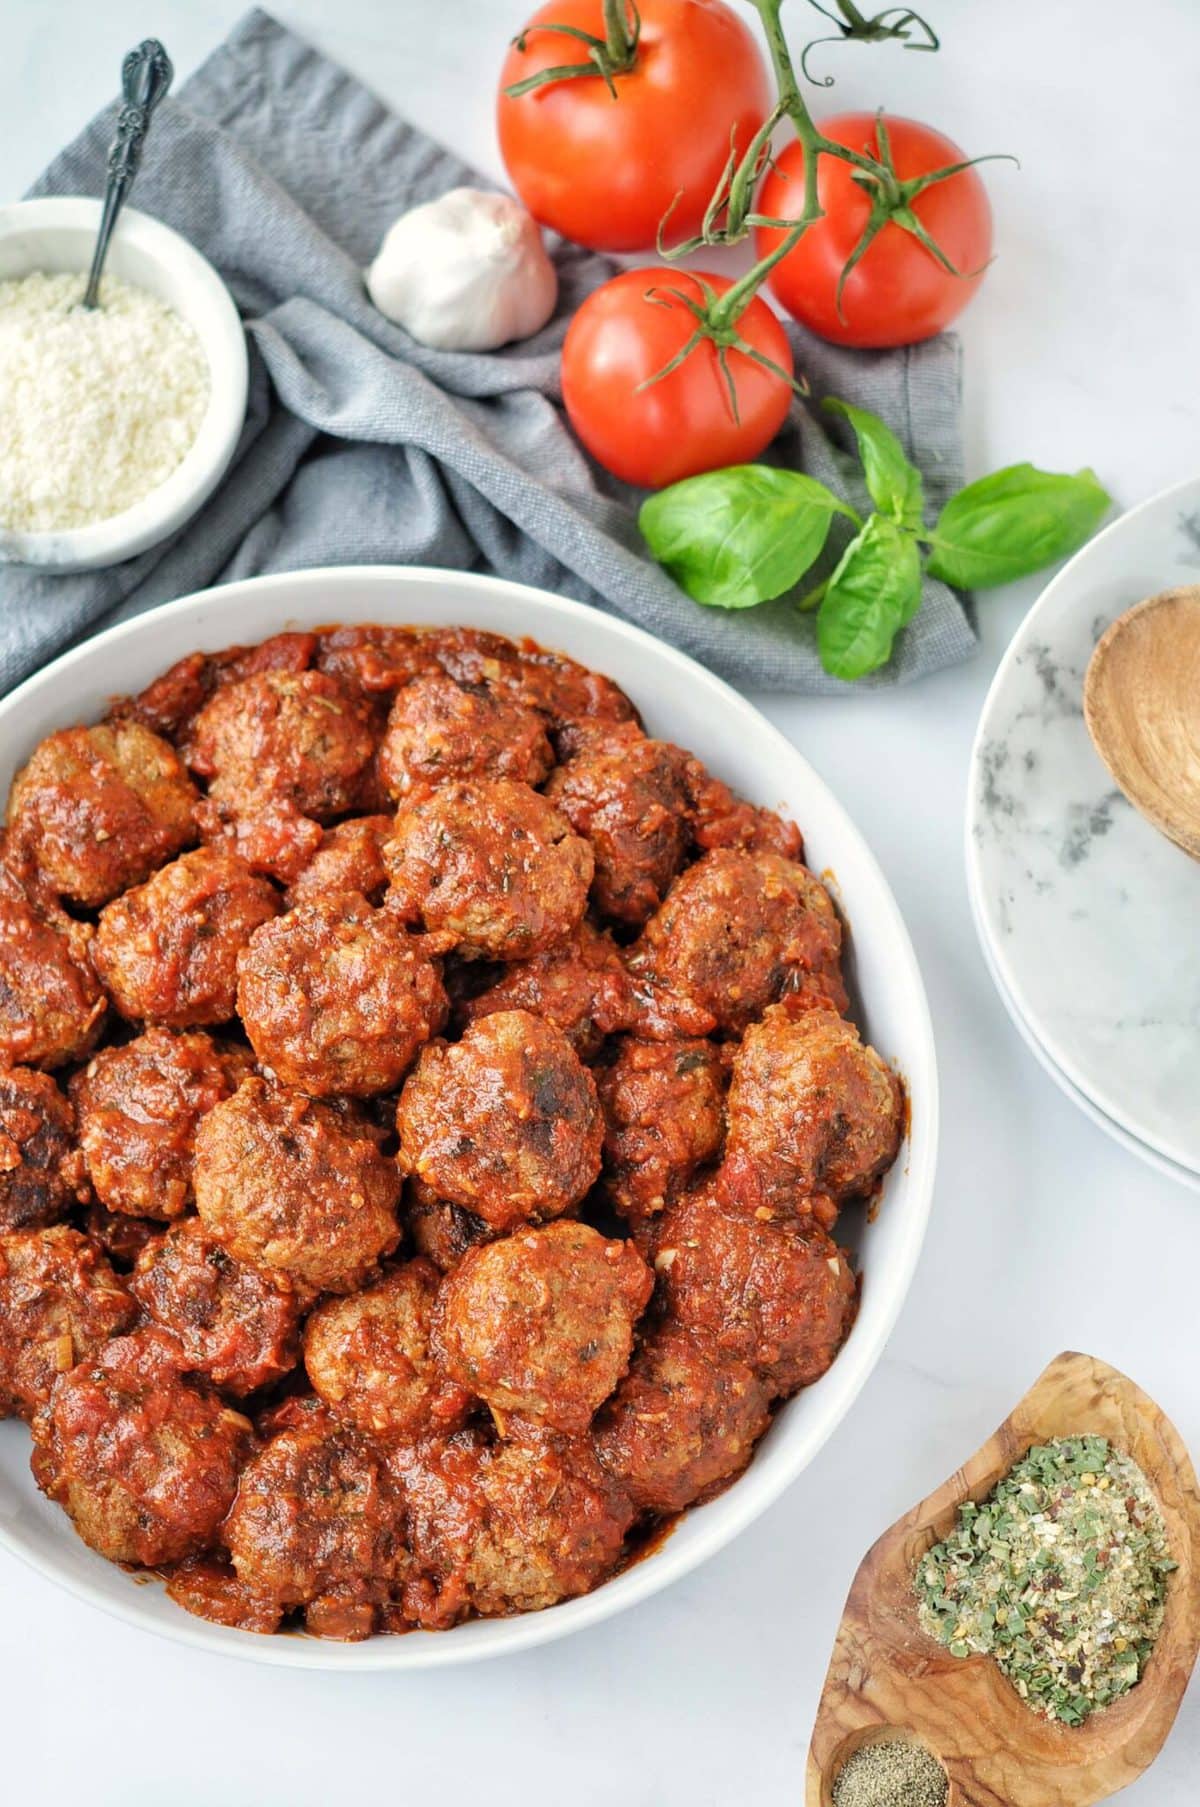 Overhead shot of slow cooked meatballs in tomato sauce